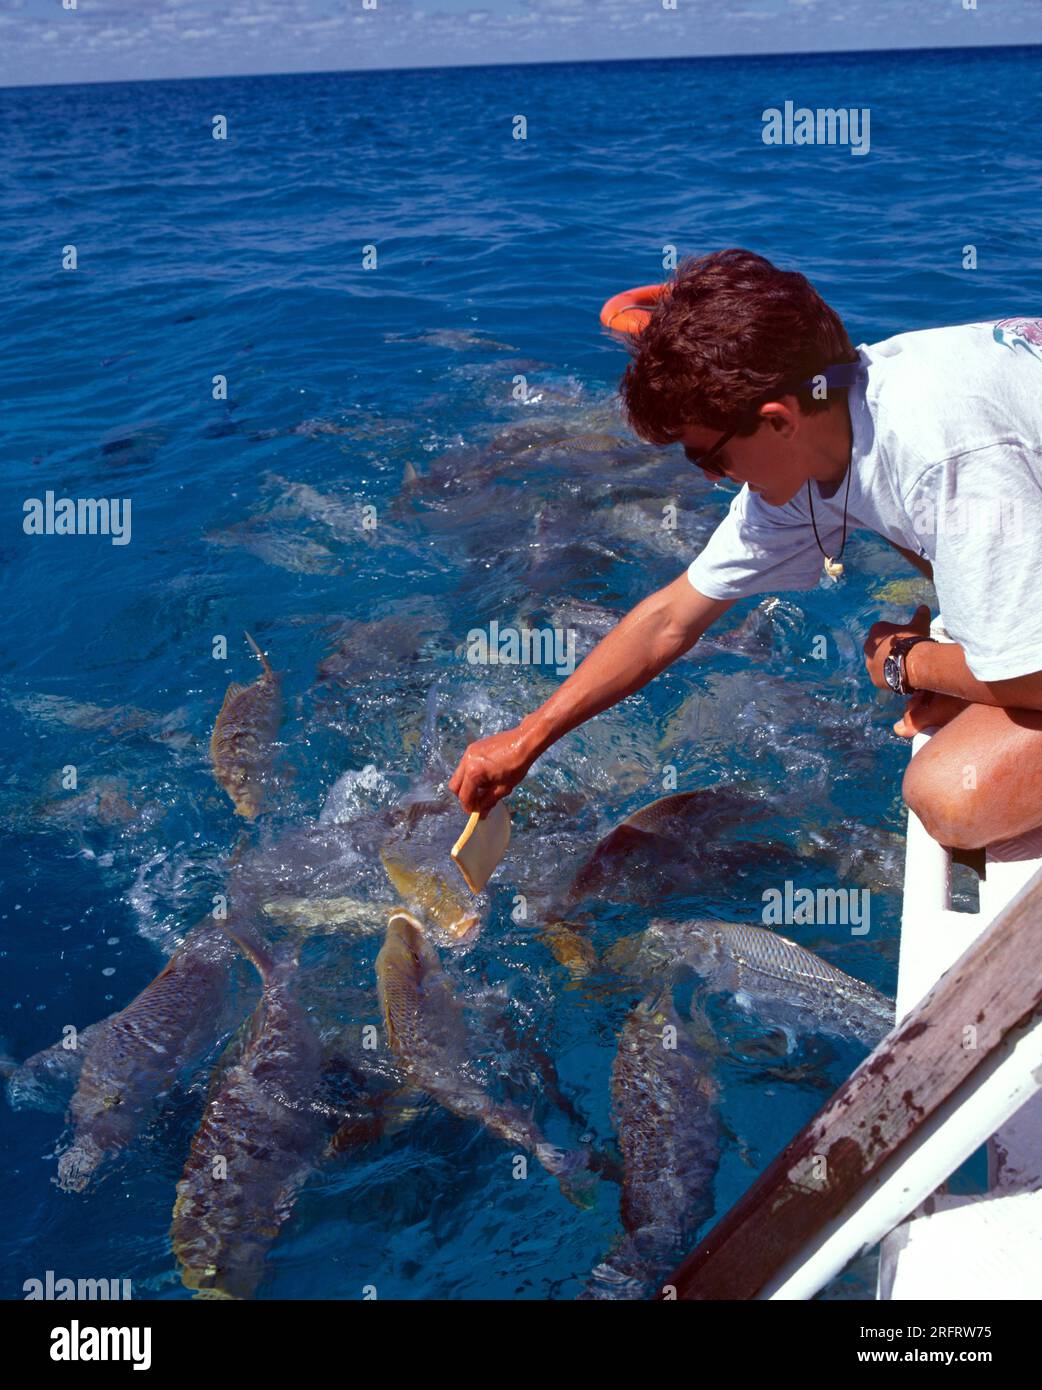 Australia. Queensland. Great Barrier Reef. Close up of a man feeding fish from a boat. Stock Photo